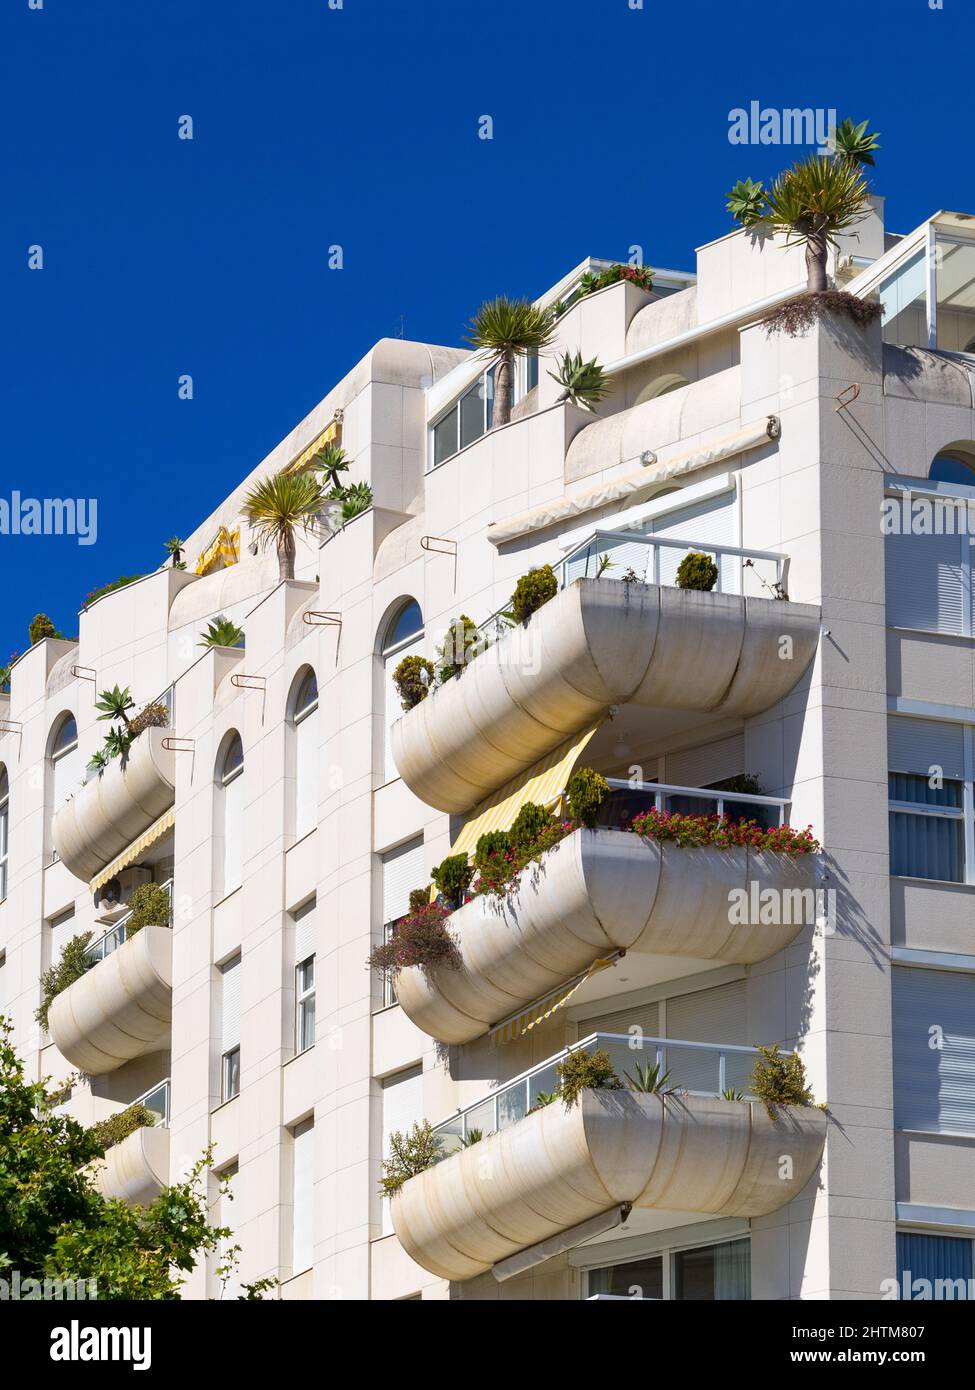 MARBELLA, ANDALUCIA, SPAIN - MAY 4 : Contemporary building in Marbella Spain on May 4, 2014 Stock Photo